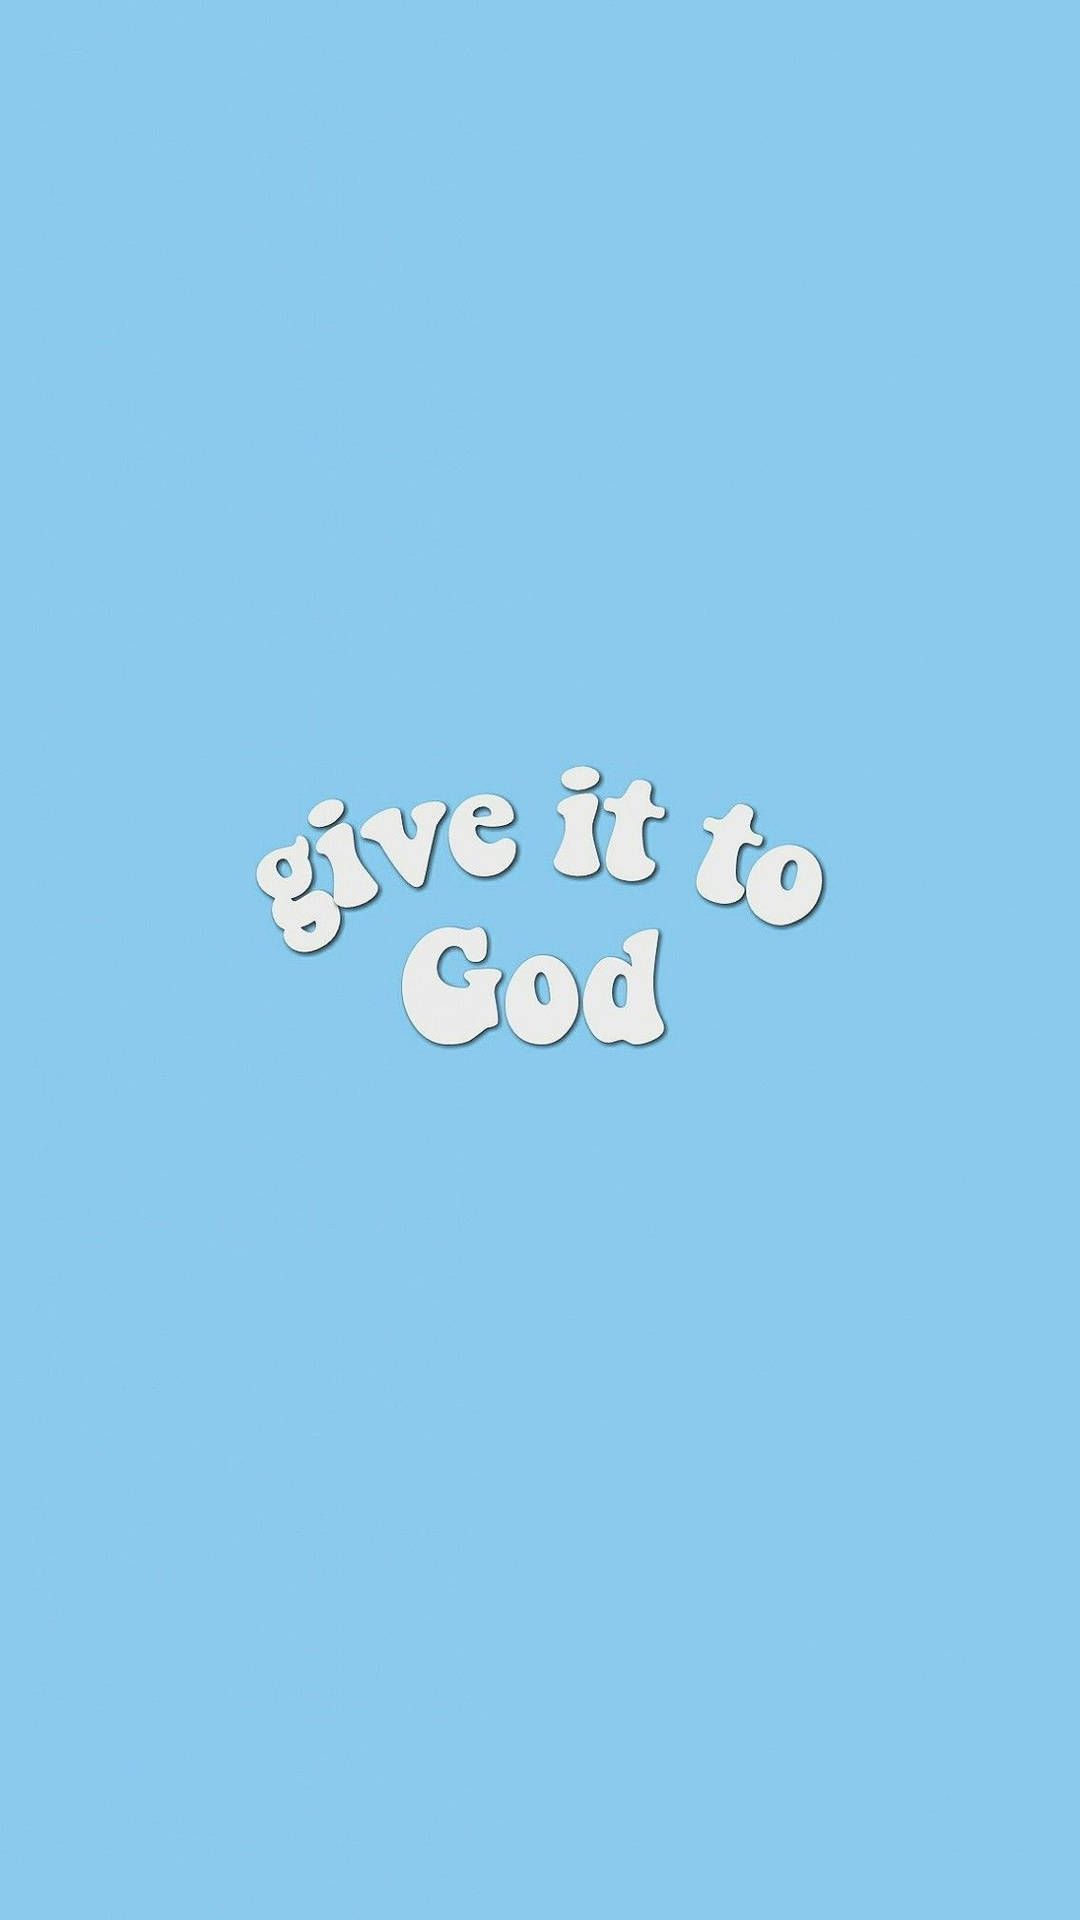 Give it to god - Jesus